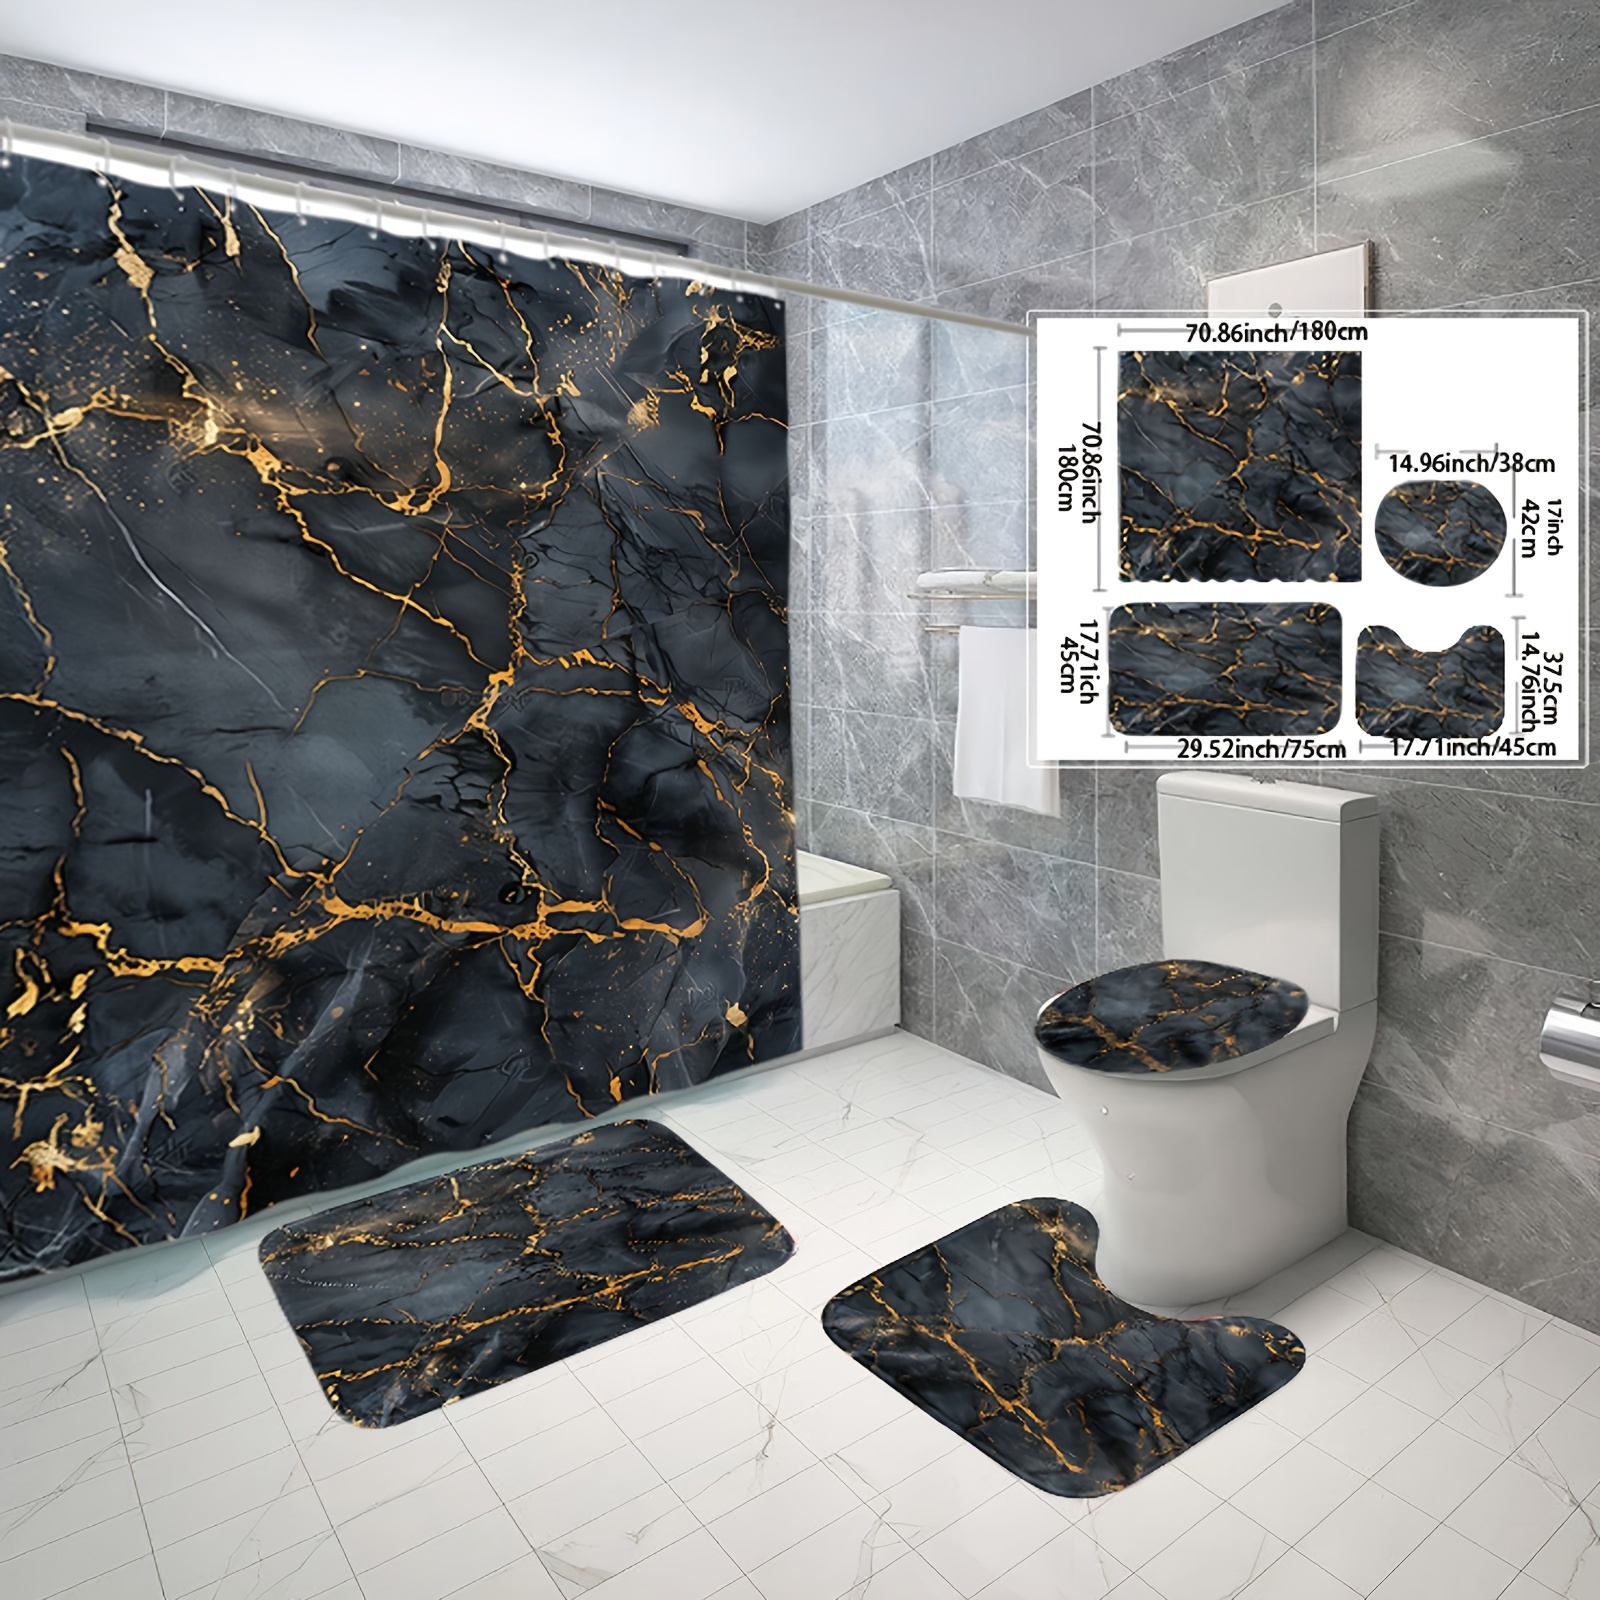 

Black Gold Marble Shower Curtain Set With Non-slip Bath Mat, U-shaped Rug & Toilet Lid Cover - Waterproof Polyester Fabric, Includes 12 Hooks